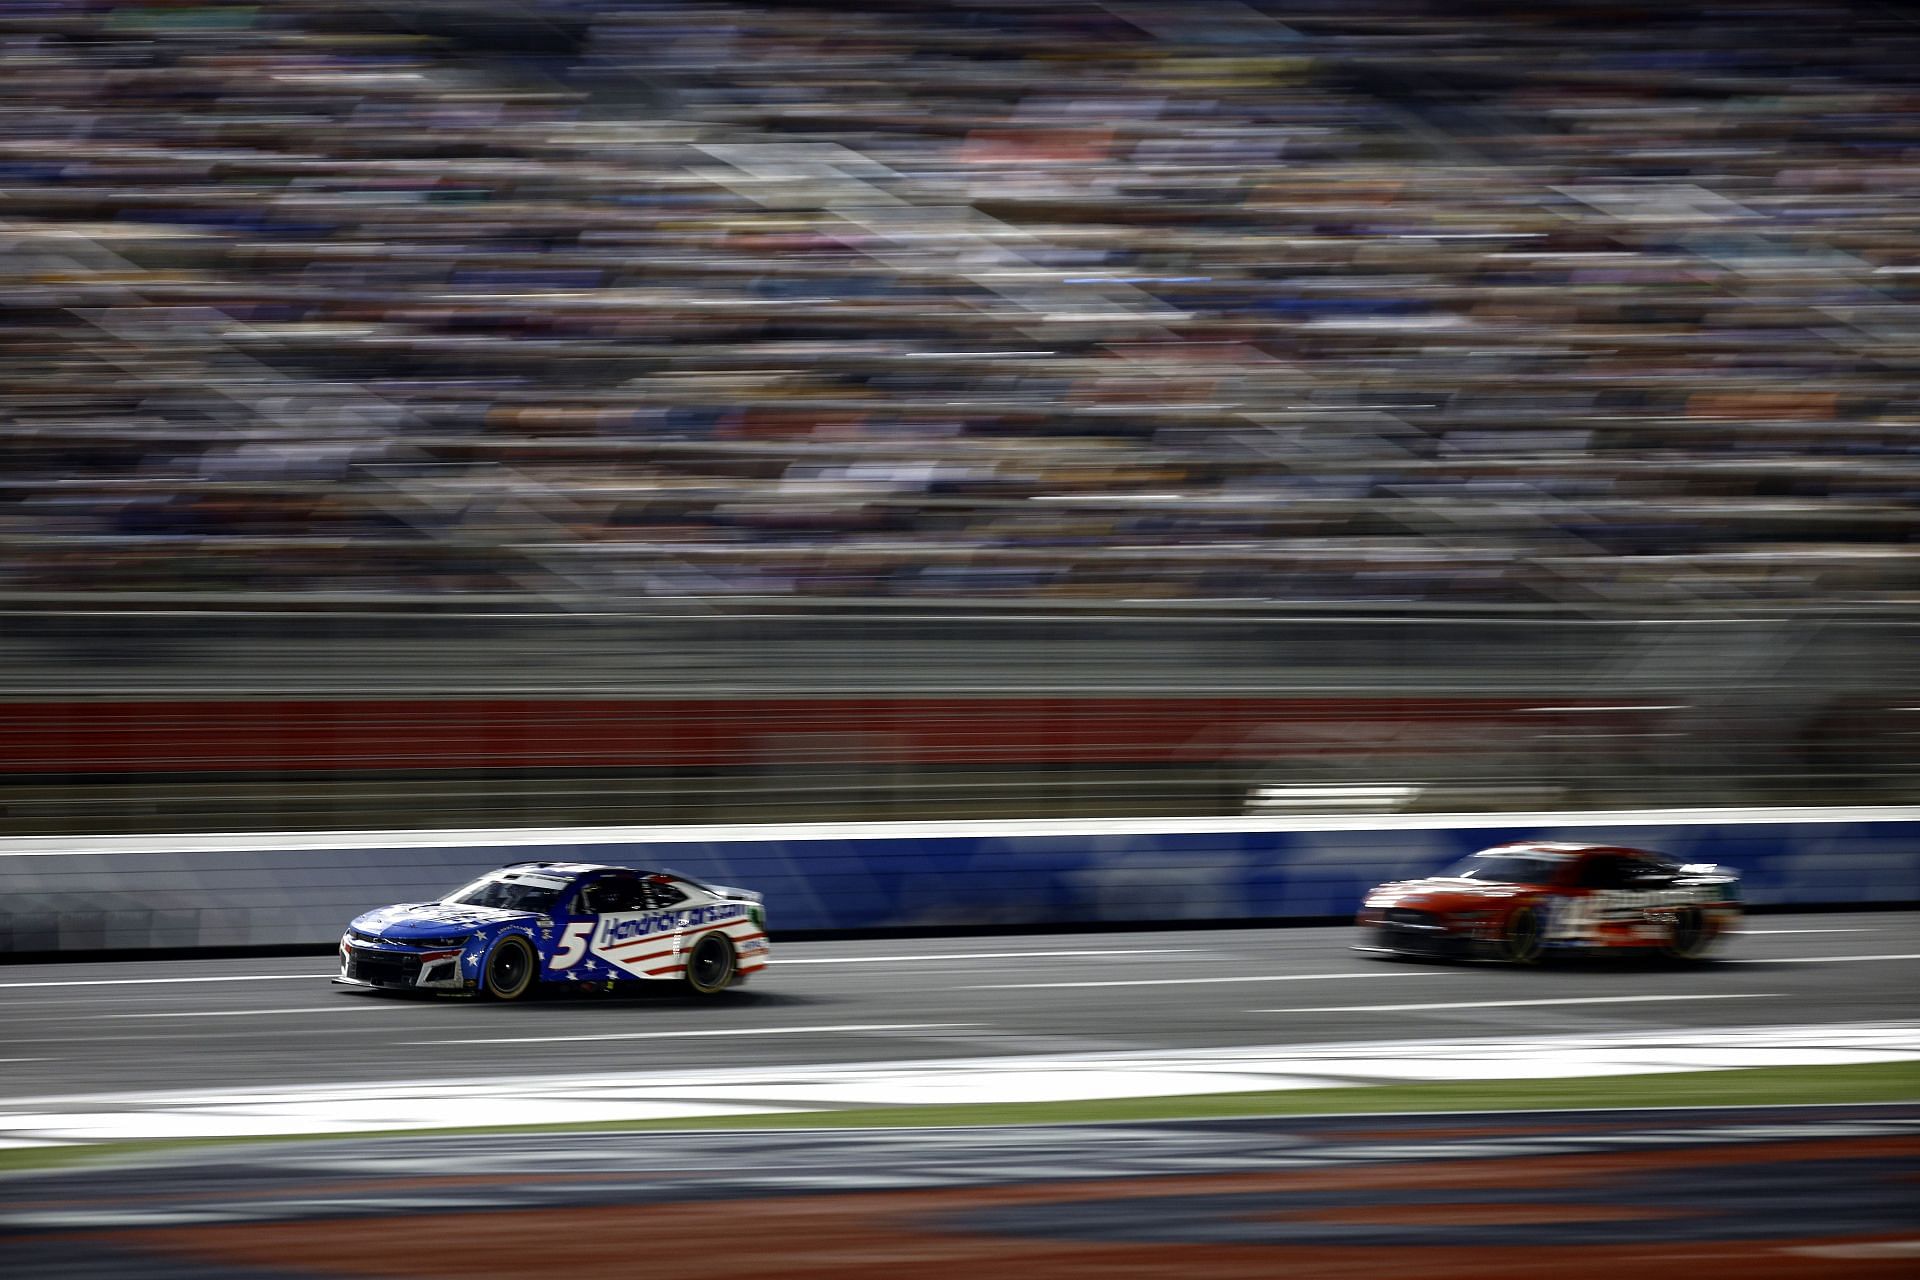 Kyle Larson drives during the NASCAR Cup Series Coca-Cola 600 at Charlotte Motor Speedway. (Photo by Jared C. Tilton/Getty Images)